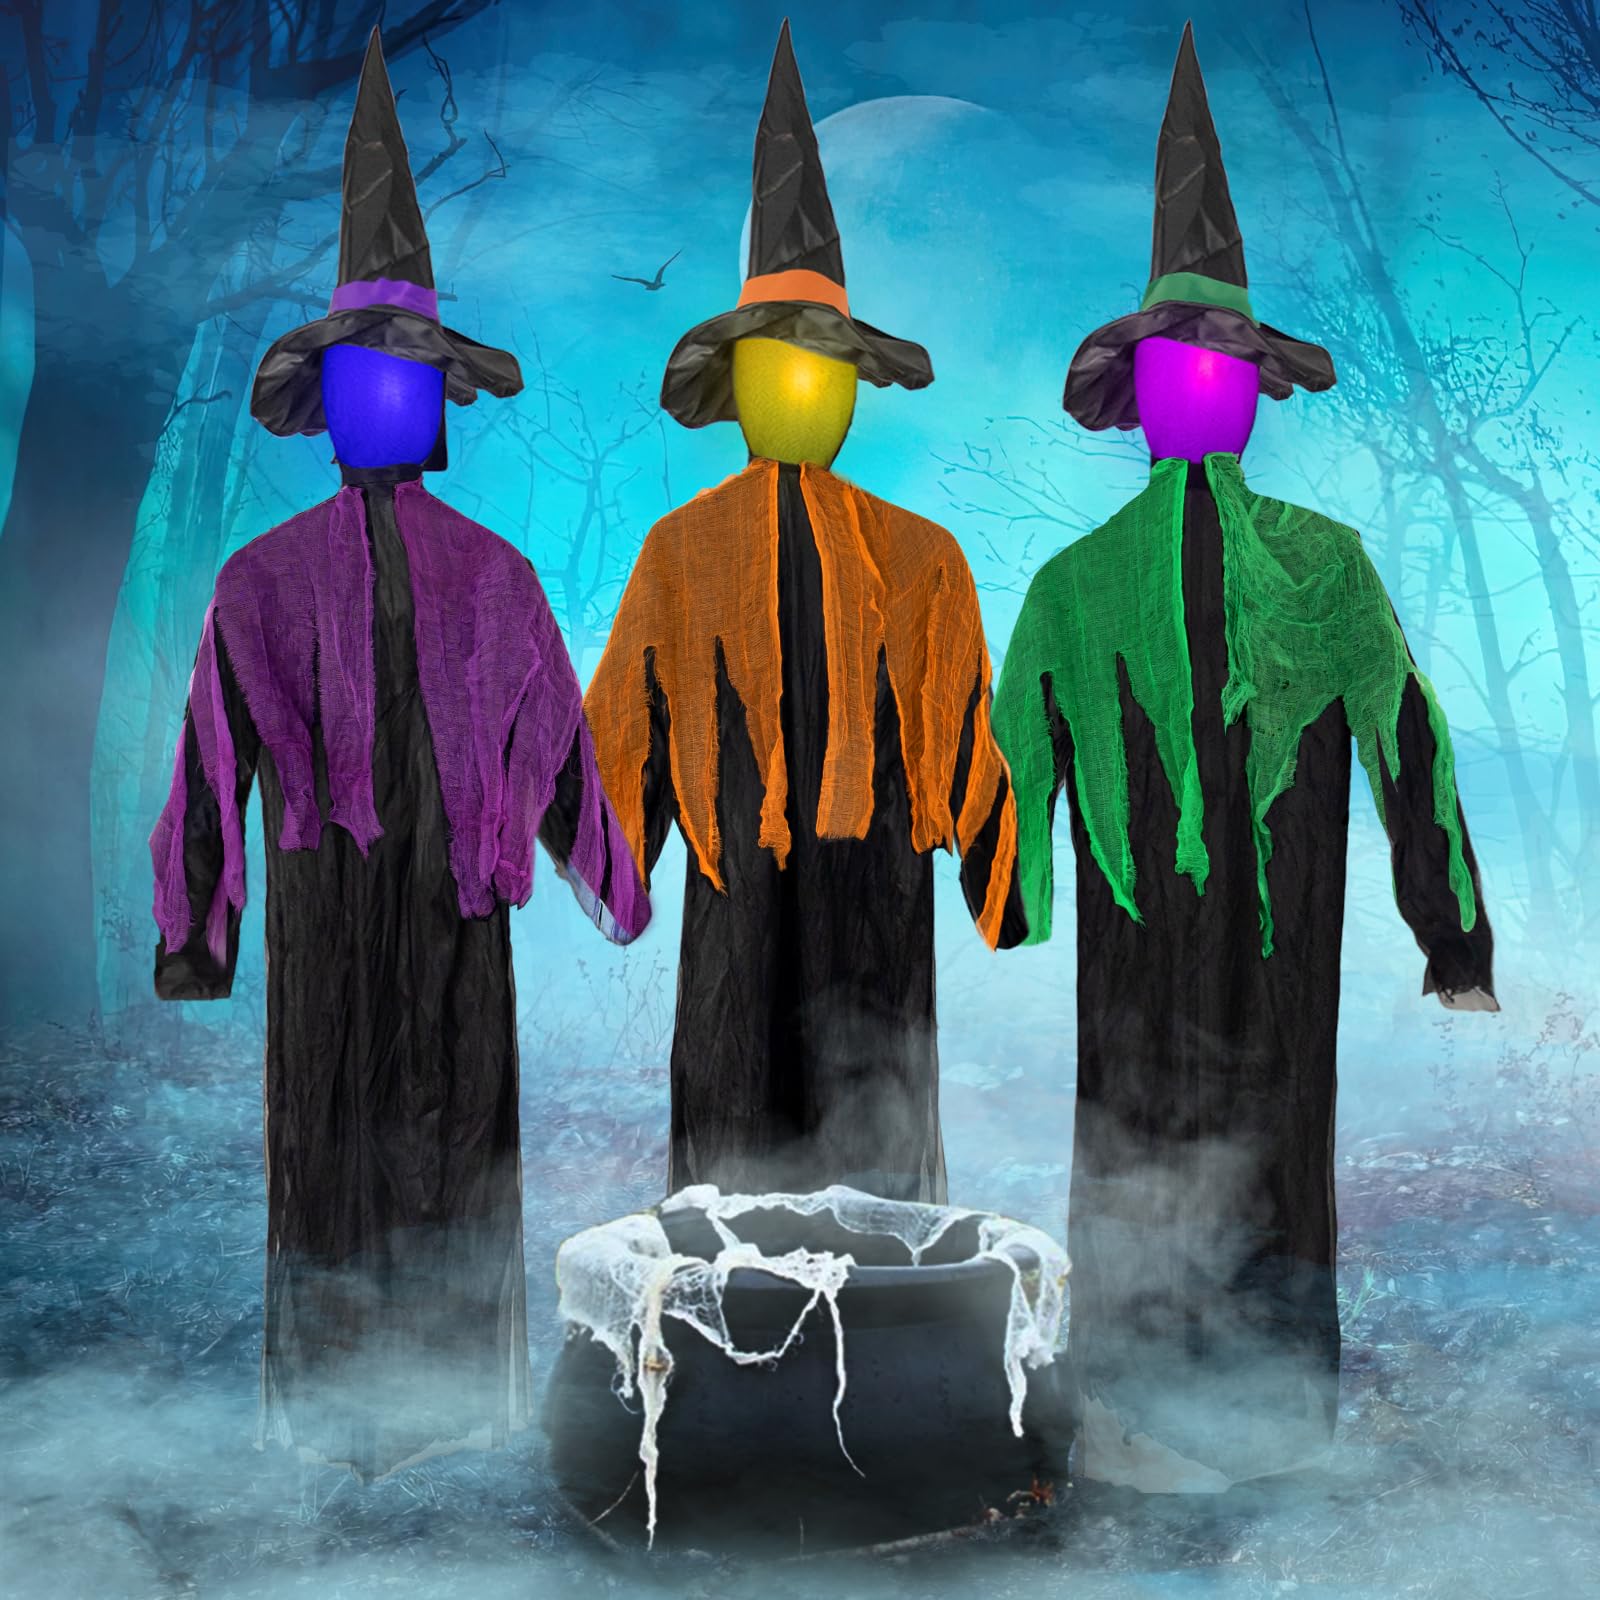 VABAMNA Witch Halloween Decorations Outdoor - 3Pcs Light Up Halloween Witch Stakes Holding Hands for Scary Halloween Yard, Patio, Haunted House Decorations Outside